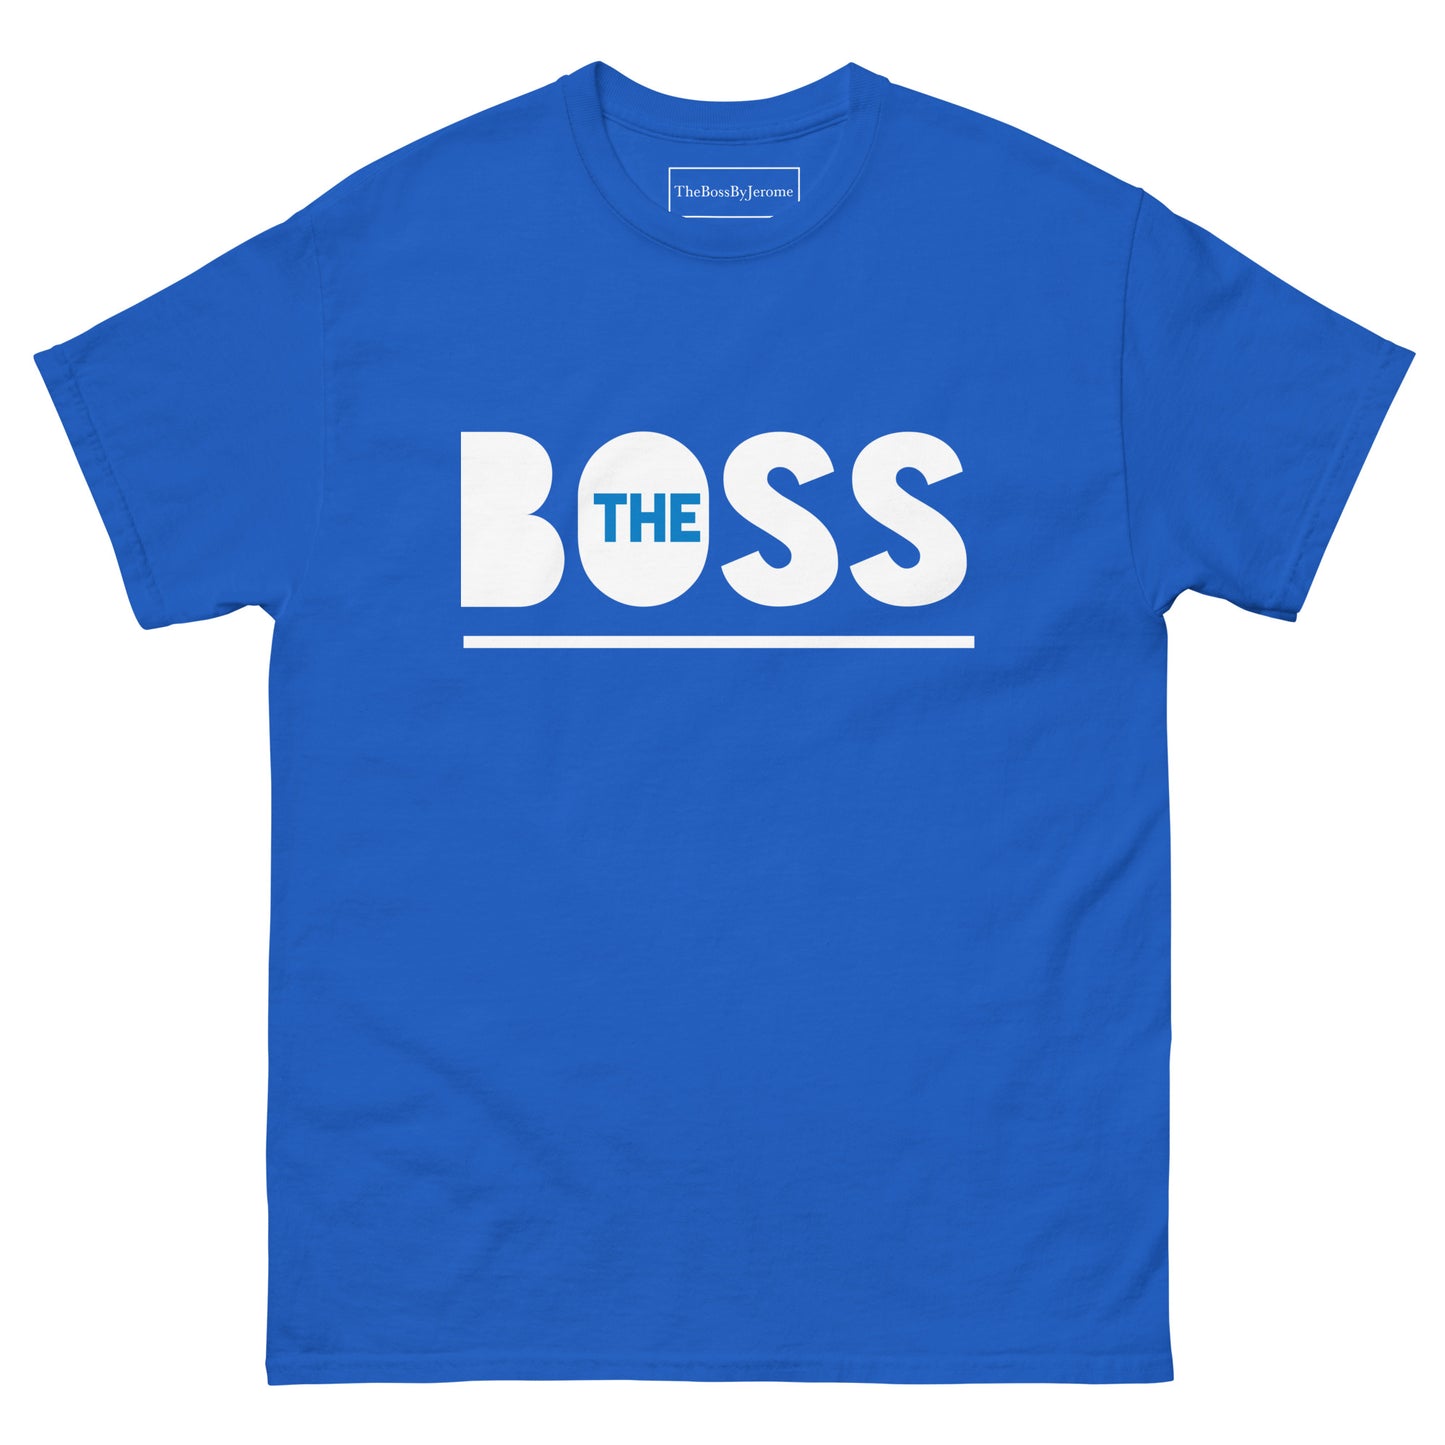 Men's classic T Shirt | Blue and White